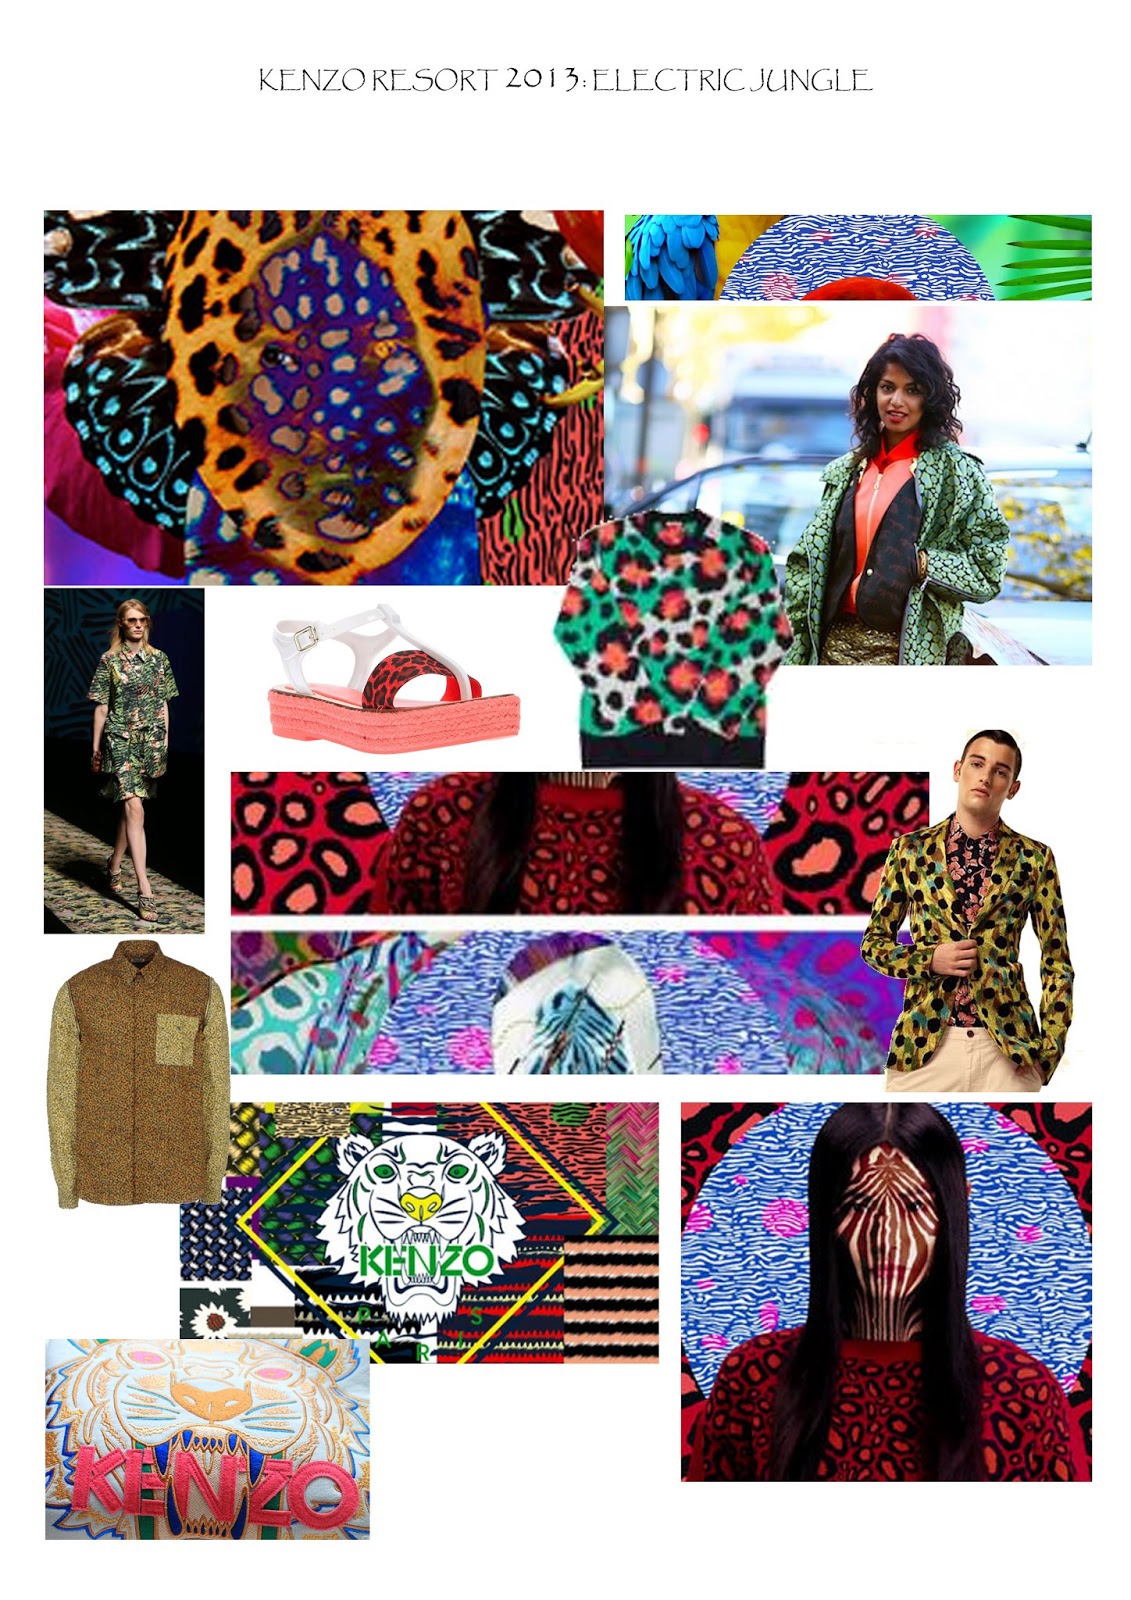 Suzanne Fraser: Kenzo mood boards for my FMP